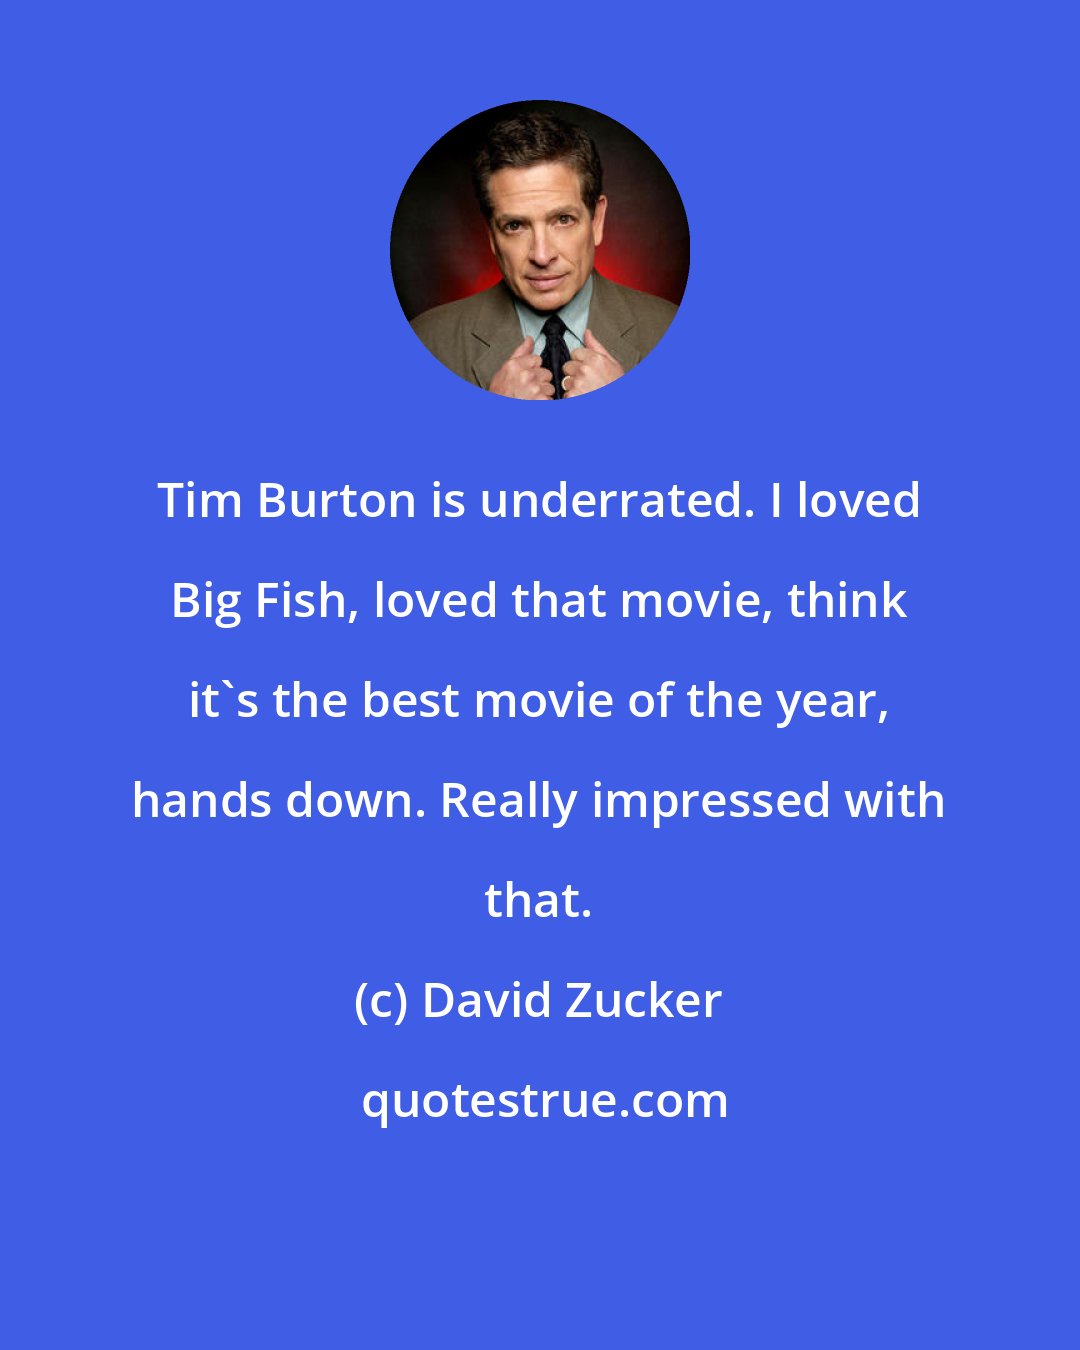 David Zucker: Tim Burton is underrated. I loved Big Fish, loved that movie, think it's the best movie of the year, hands down. Really impressed with that.